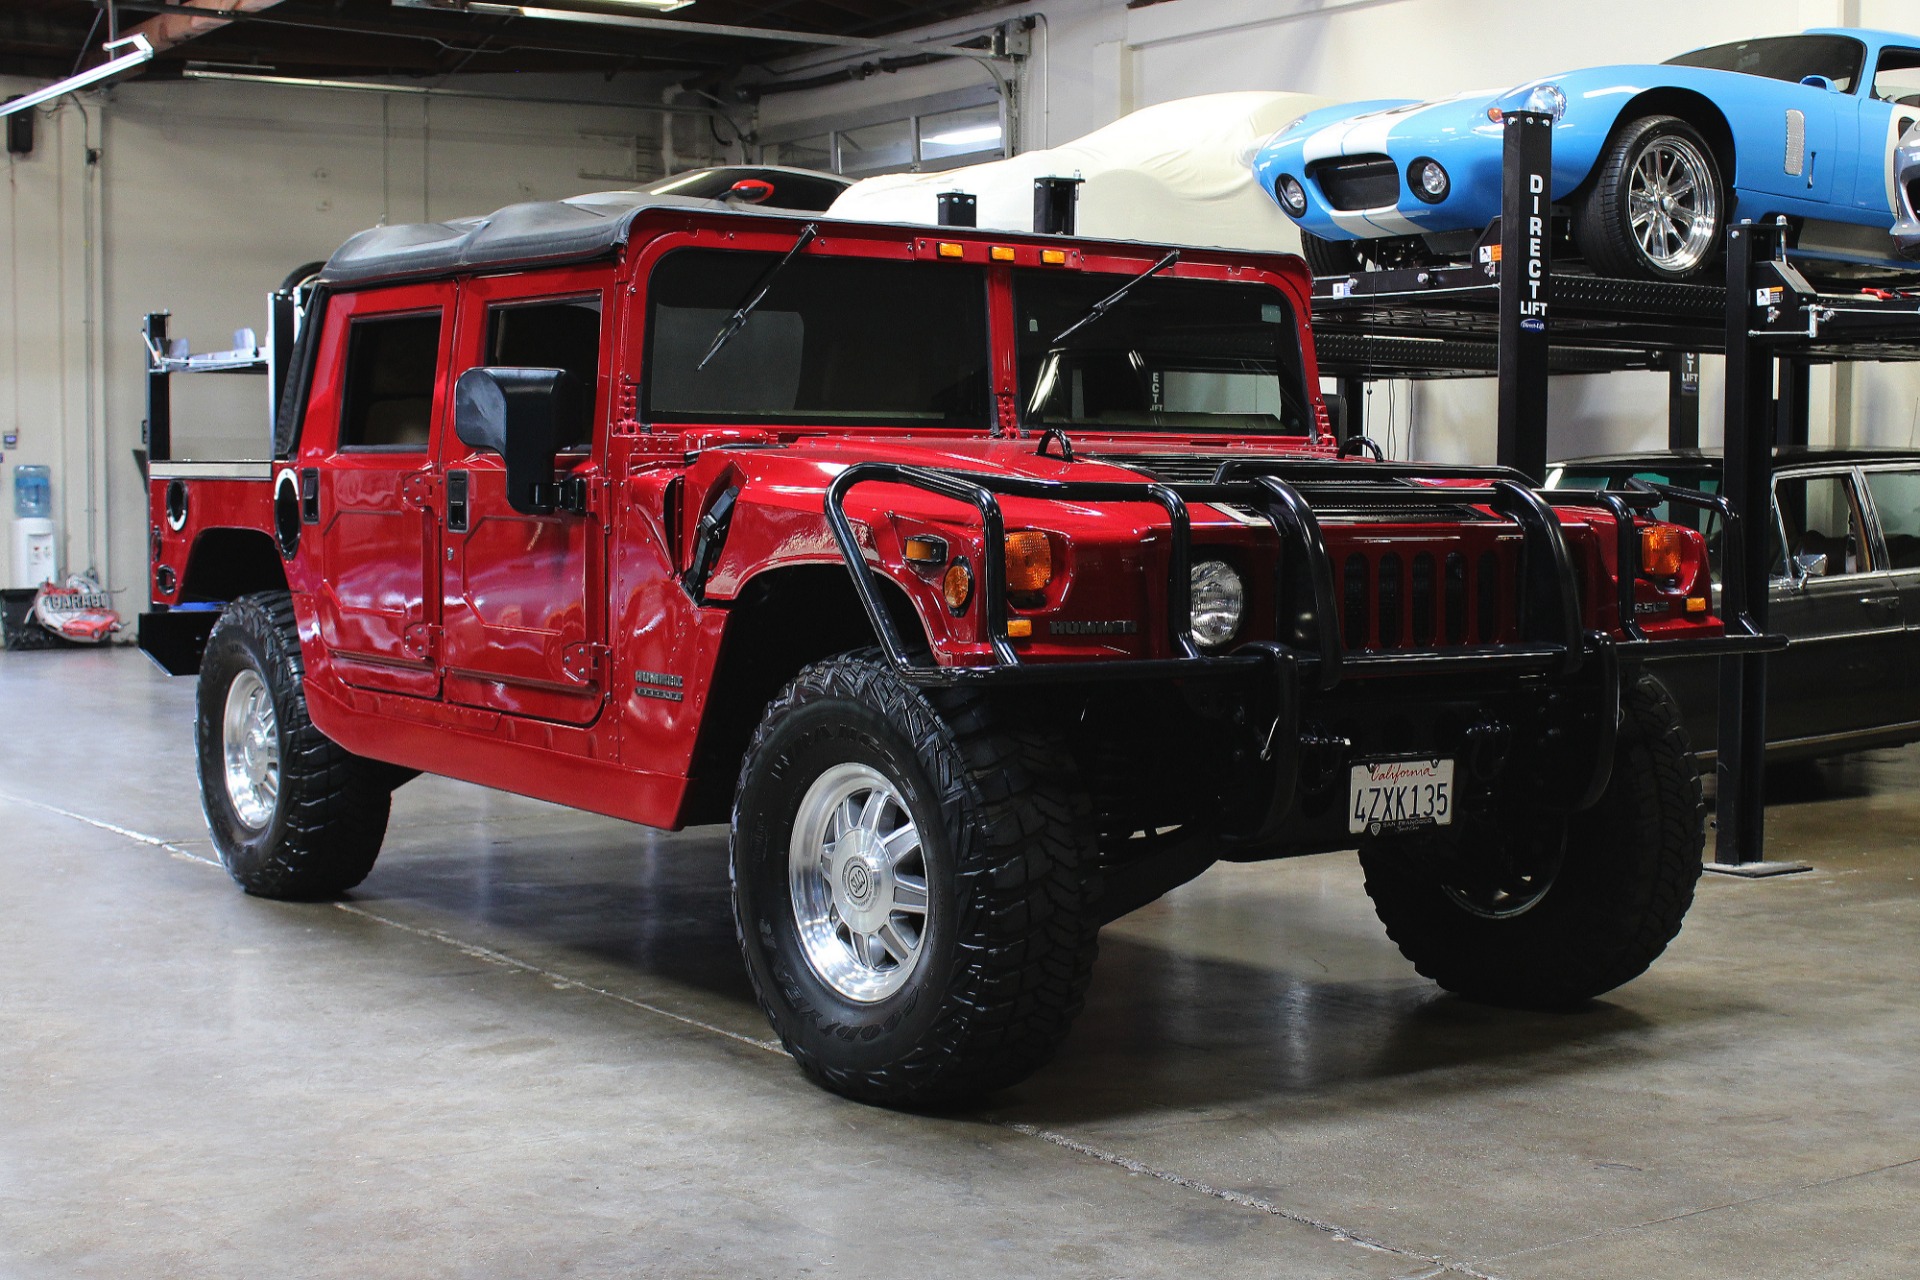 Used 2001 Hummer H1 Open Top for sale $99,995 at San Francisco Sports Cars in San Carlos CA 94070 1